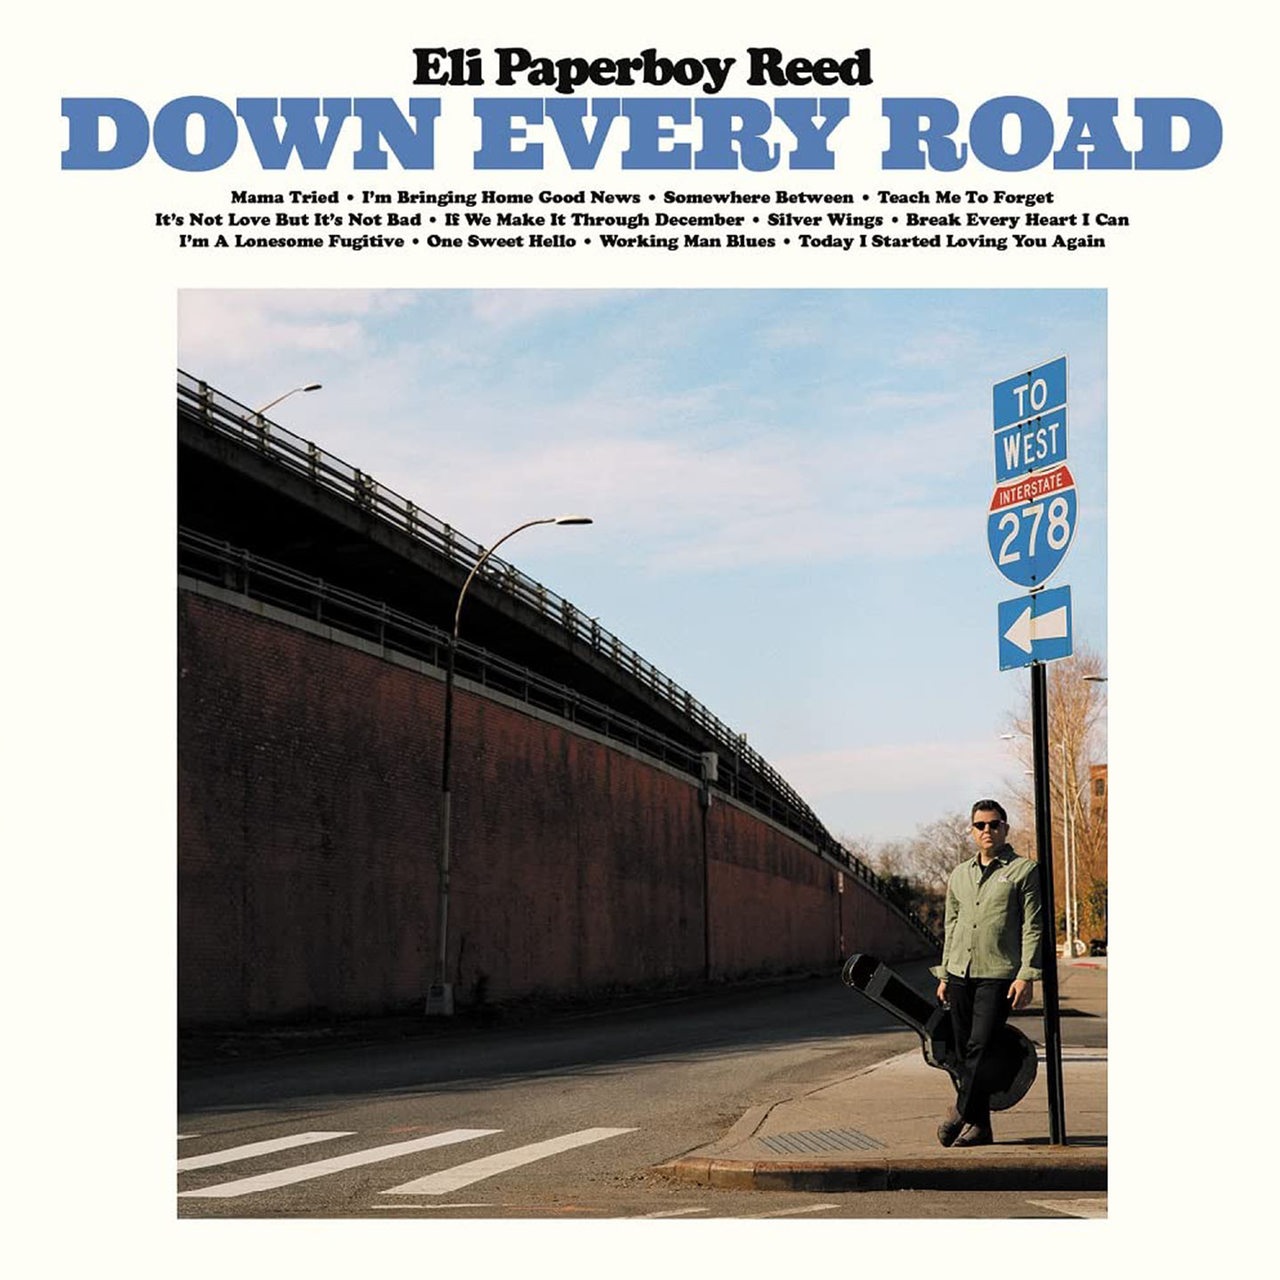 Albumcover von Eli Paperboy Reed "Down every road"